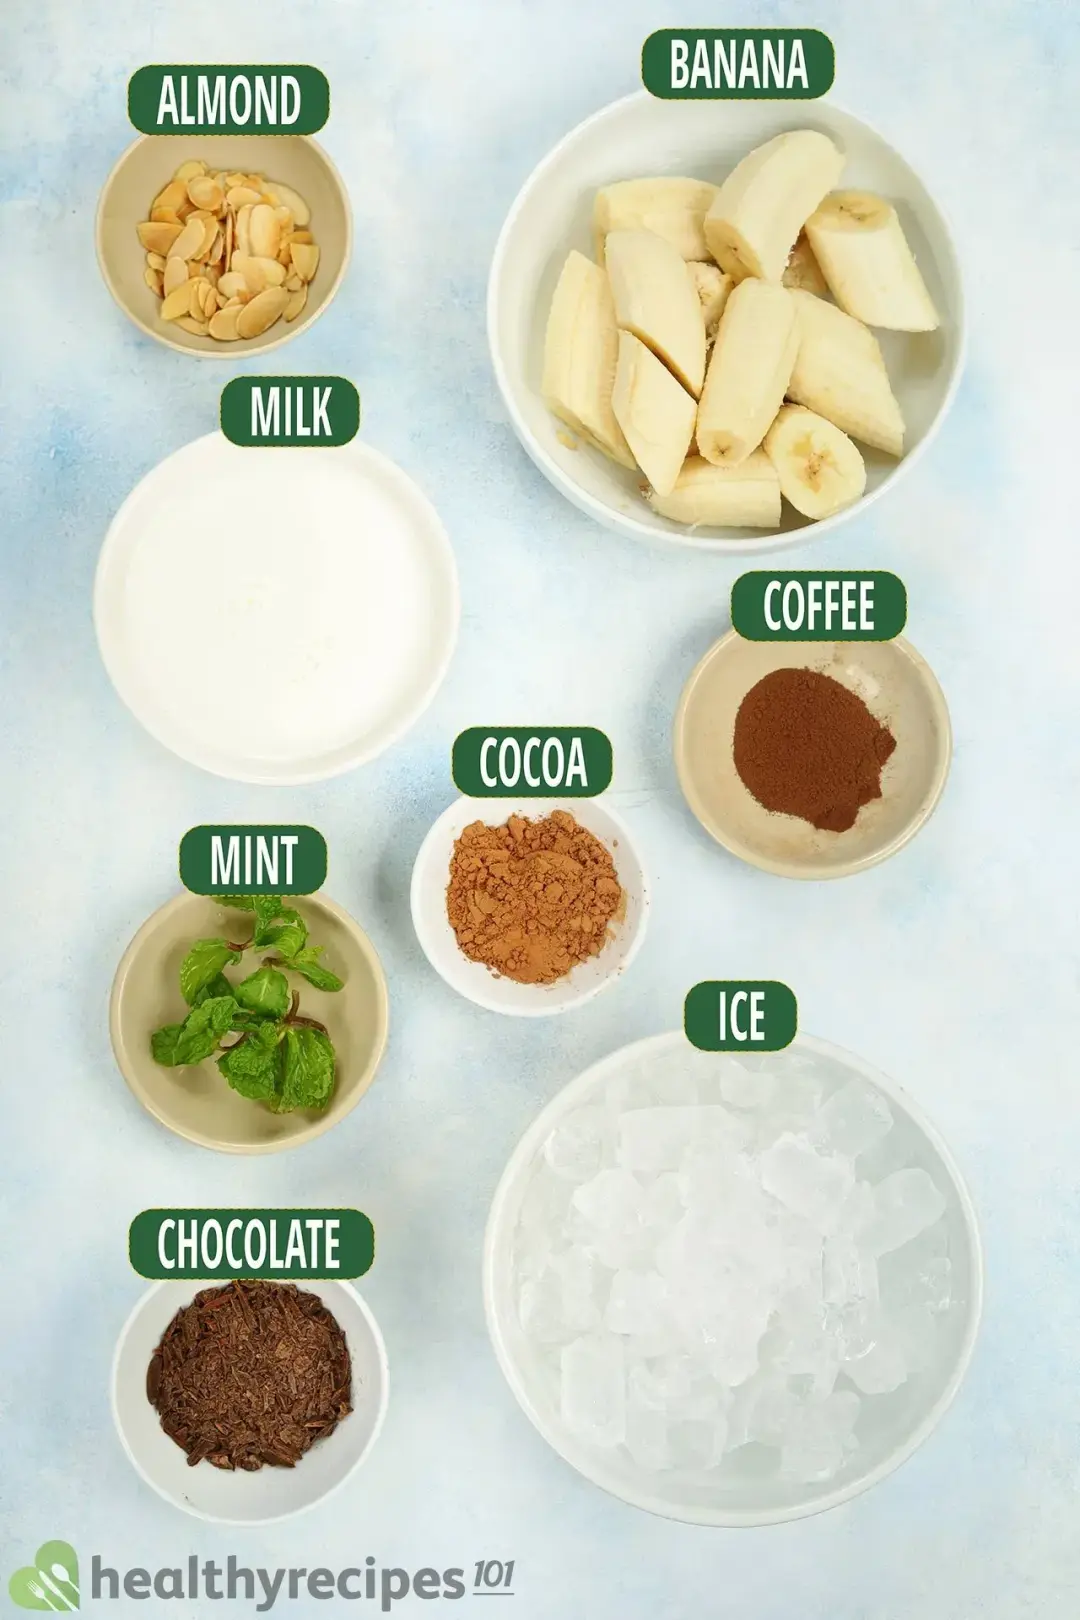 Ingredients for This Coffee Banana Smoothie